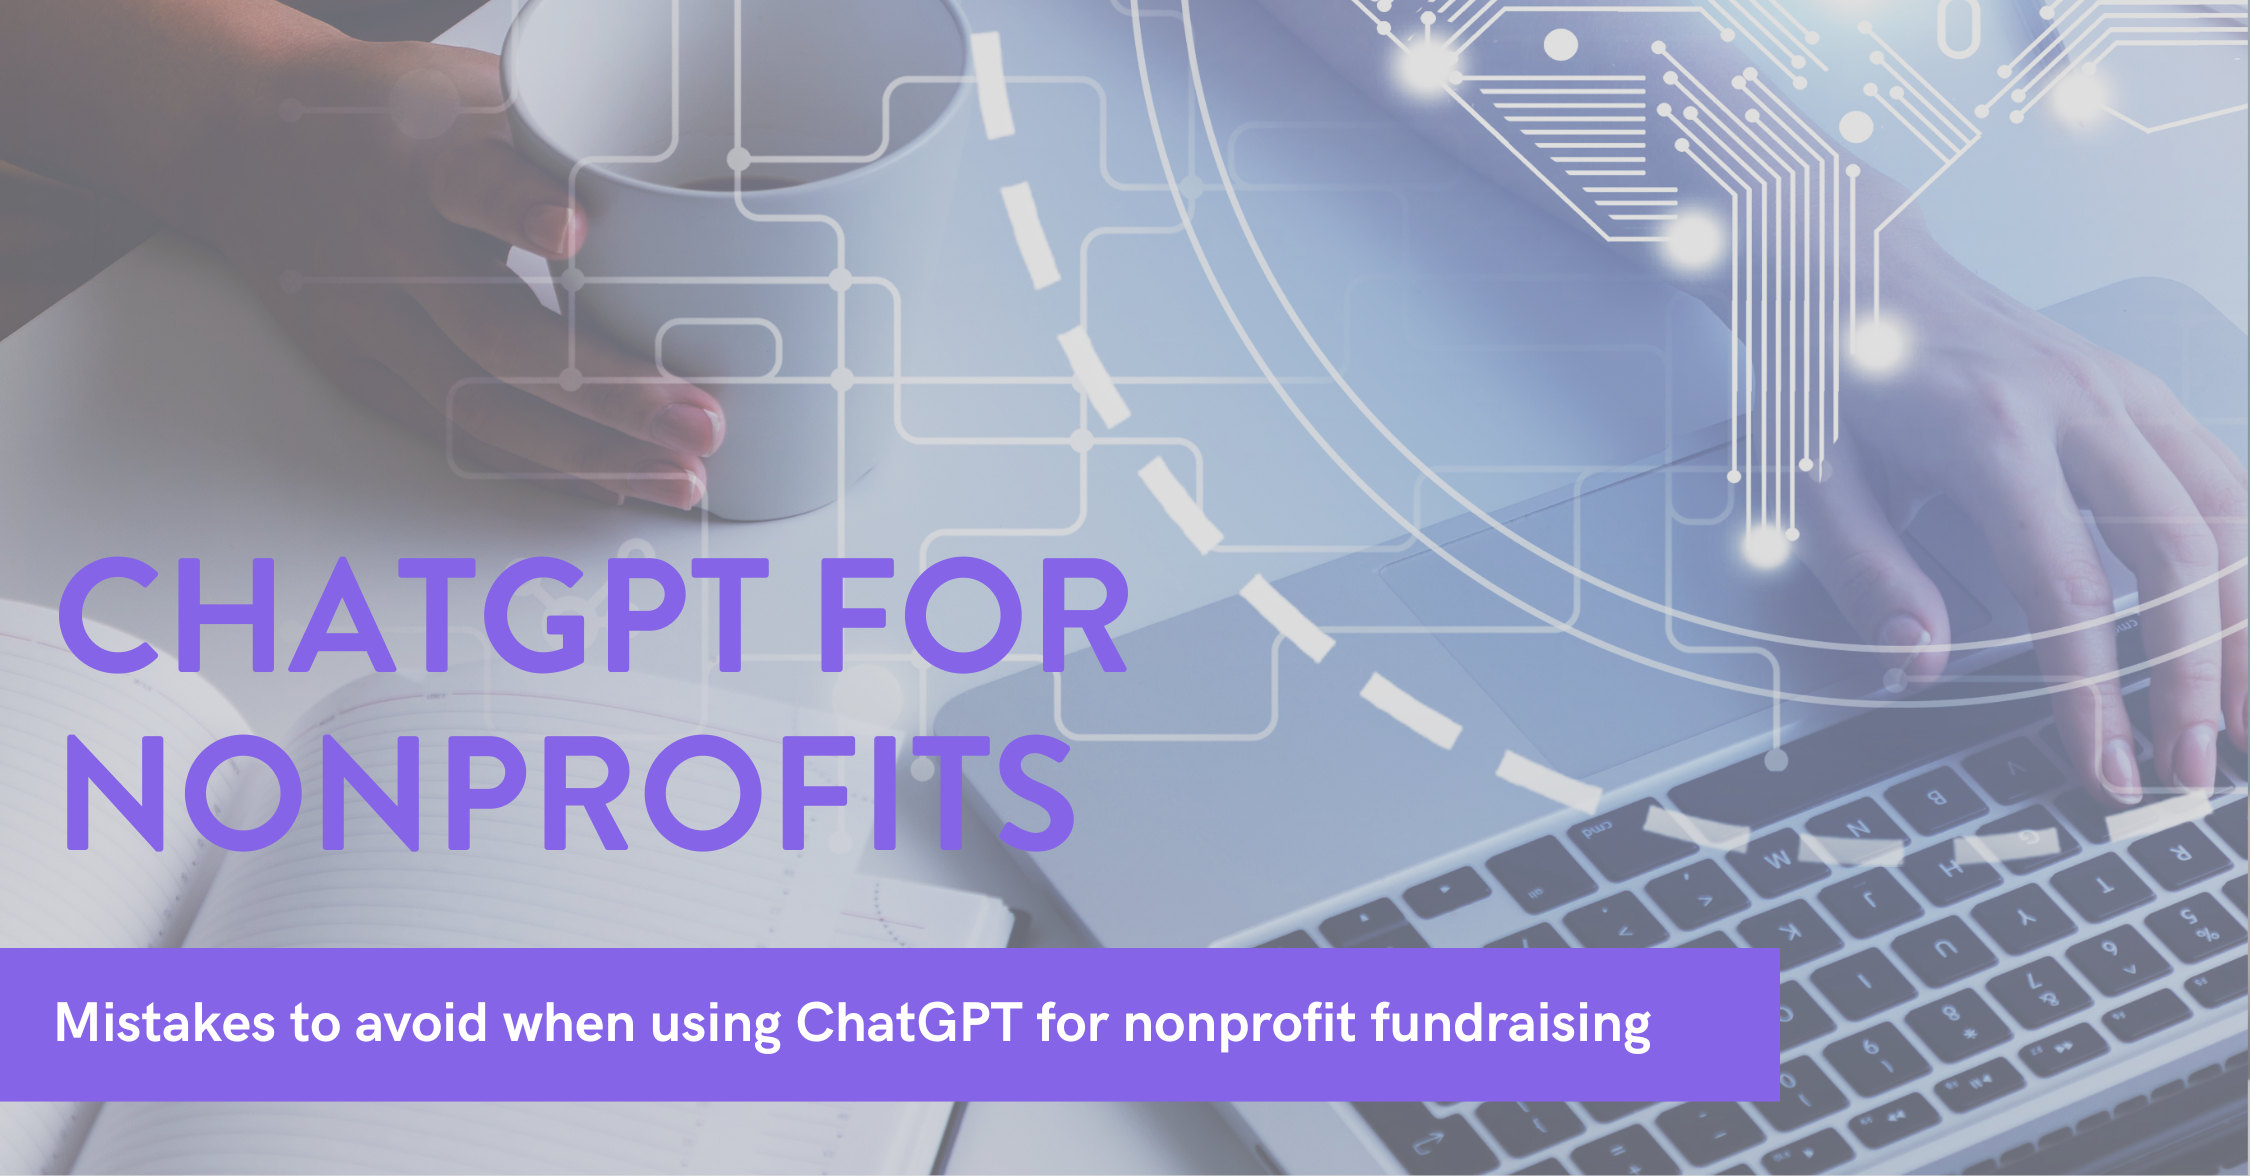 ChatGPT for Nonprofit Fundraising: Common Mistakes To Avoid